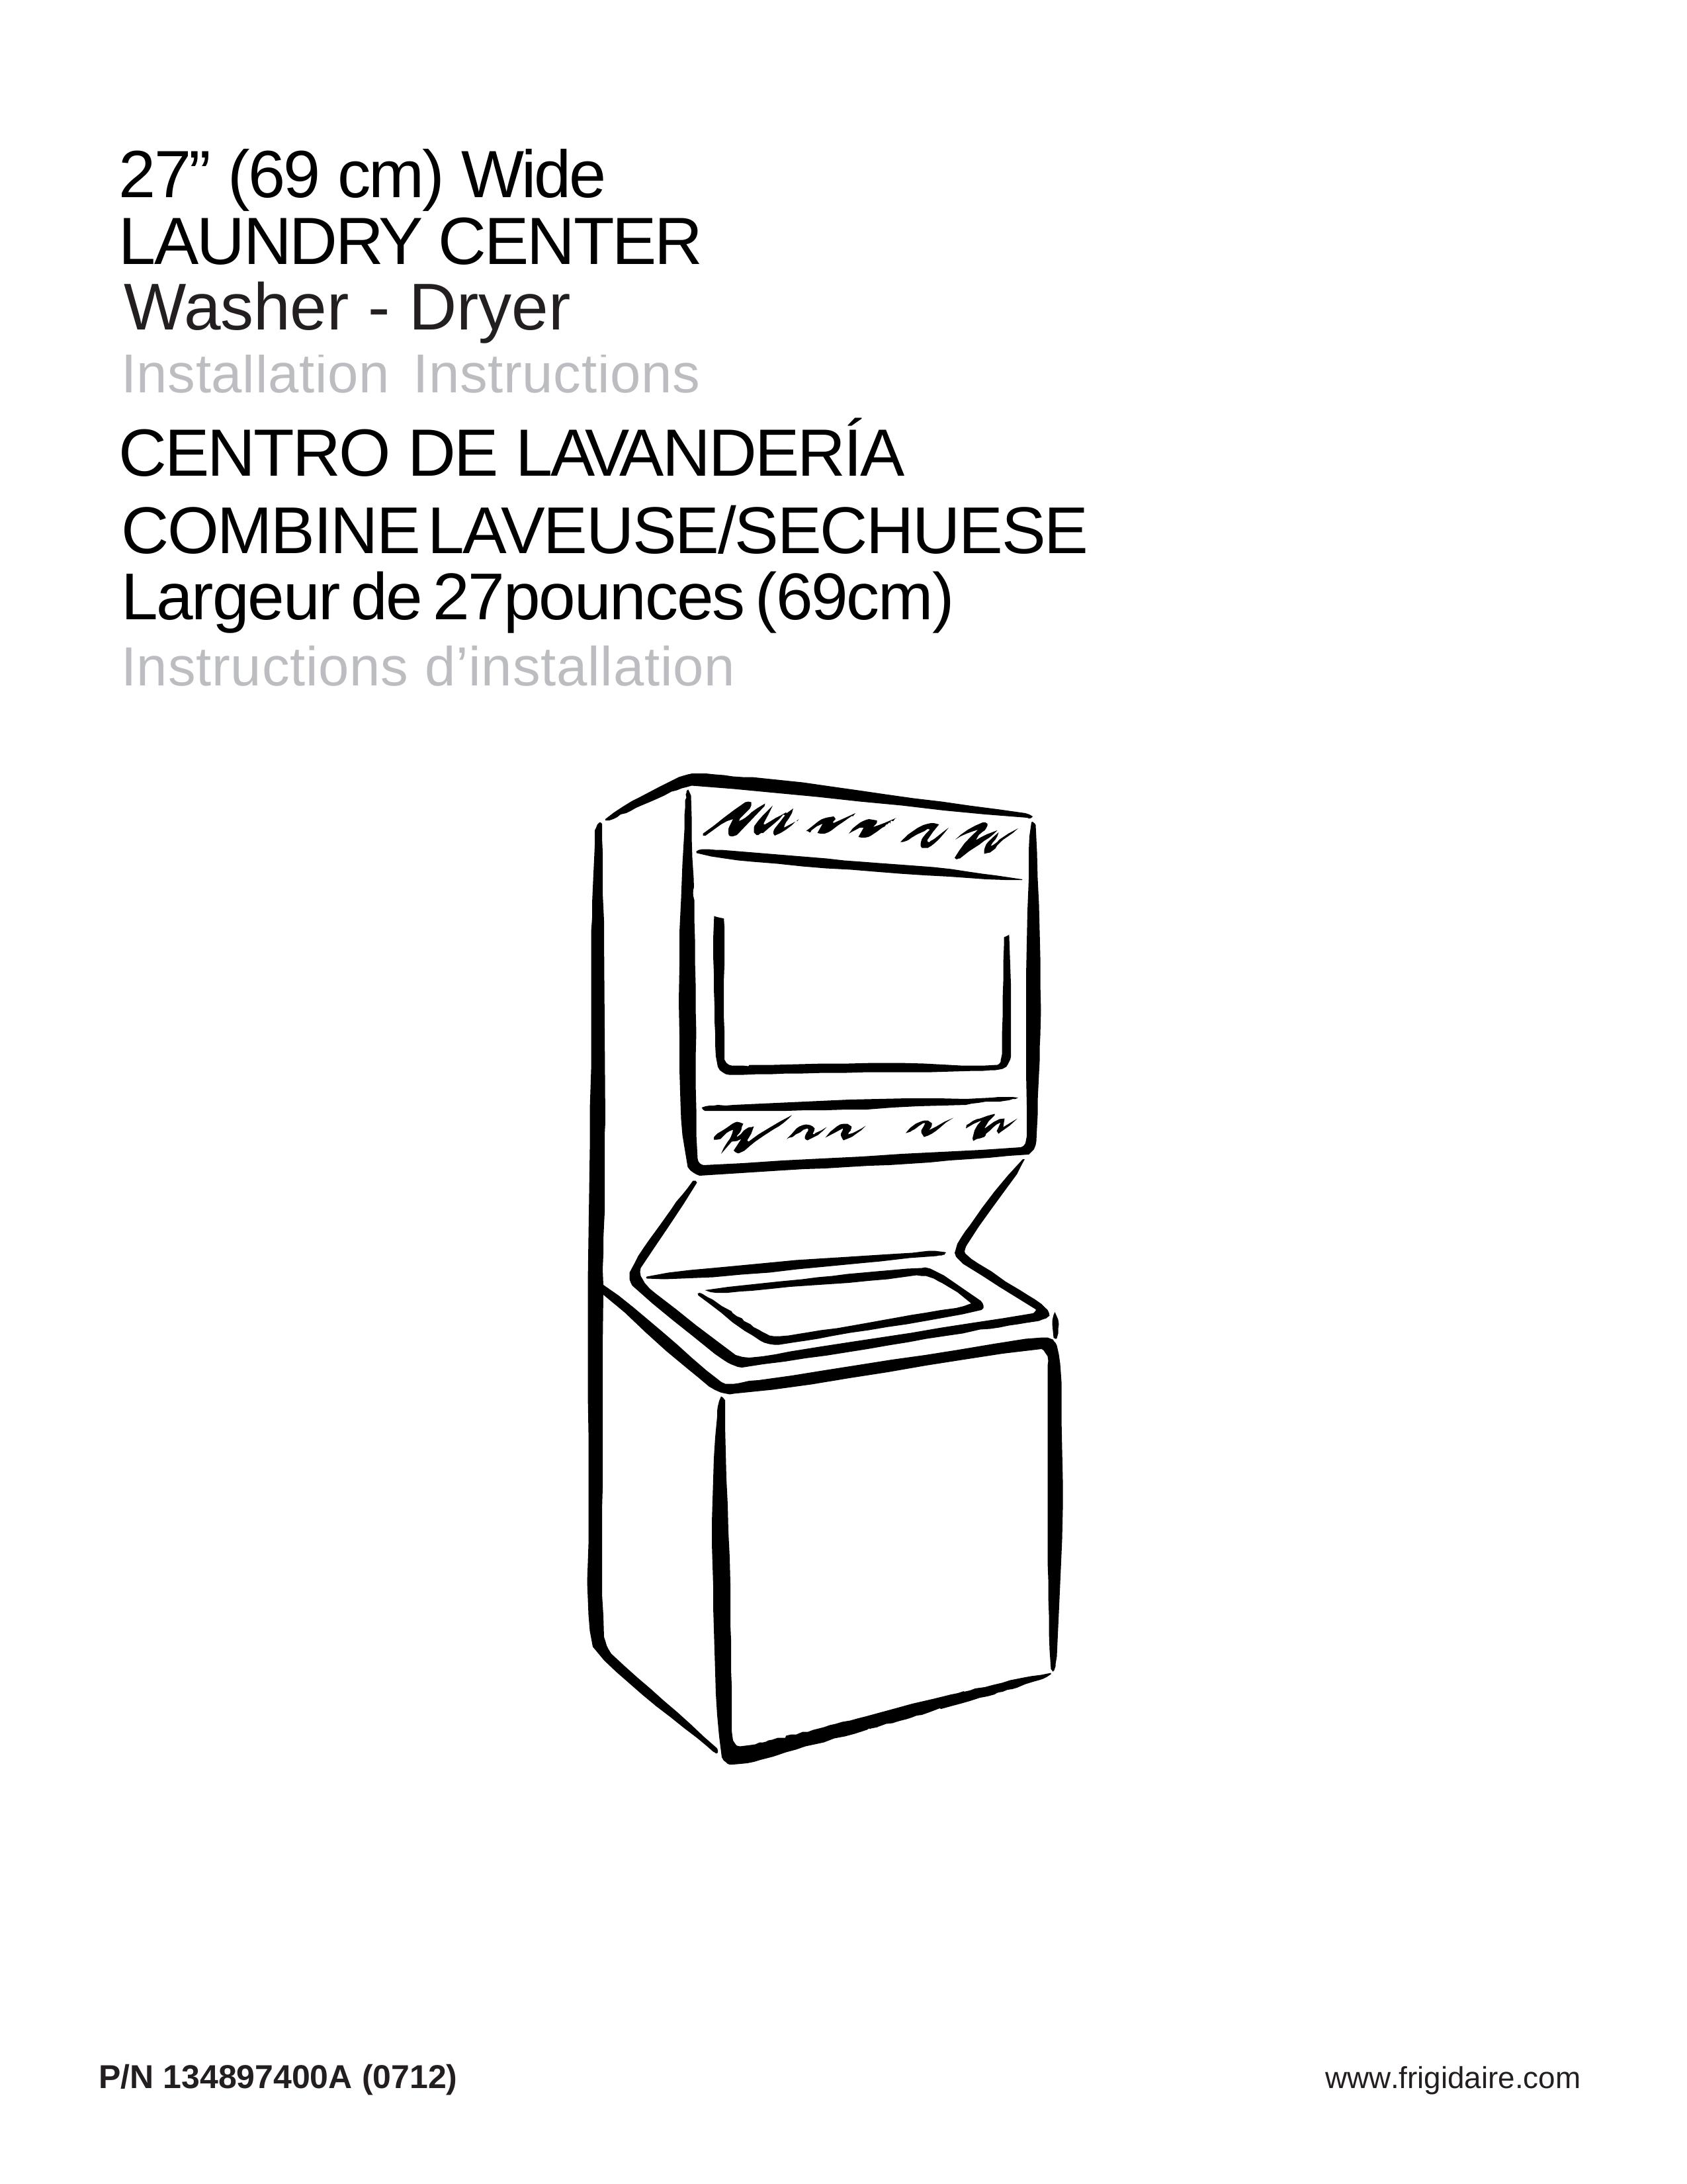 Frigidaire 134897400A Washer/Dryer User Manual